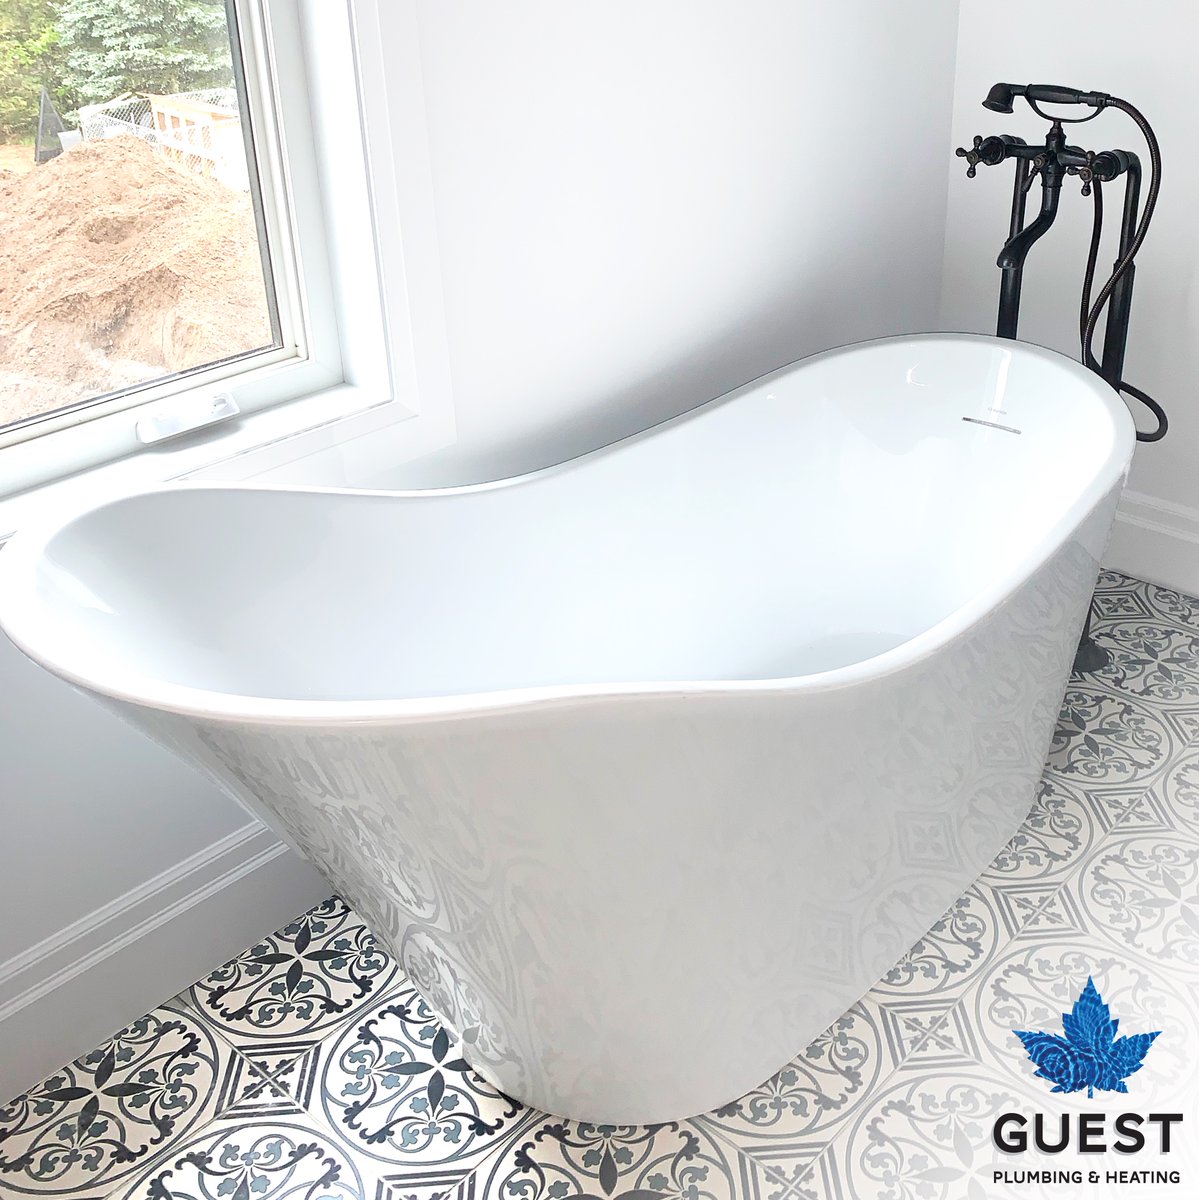 Besides some outdoor summer activities like golfing, hiking or cycling, having time to unwind to prepare for a new week is also necessary. This peanut-shaped freestanding tub certainly could help us attain that goal. 
#summer #summer2022 #bathroom #bathroomideas #freestandingtub